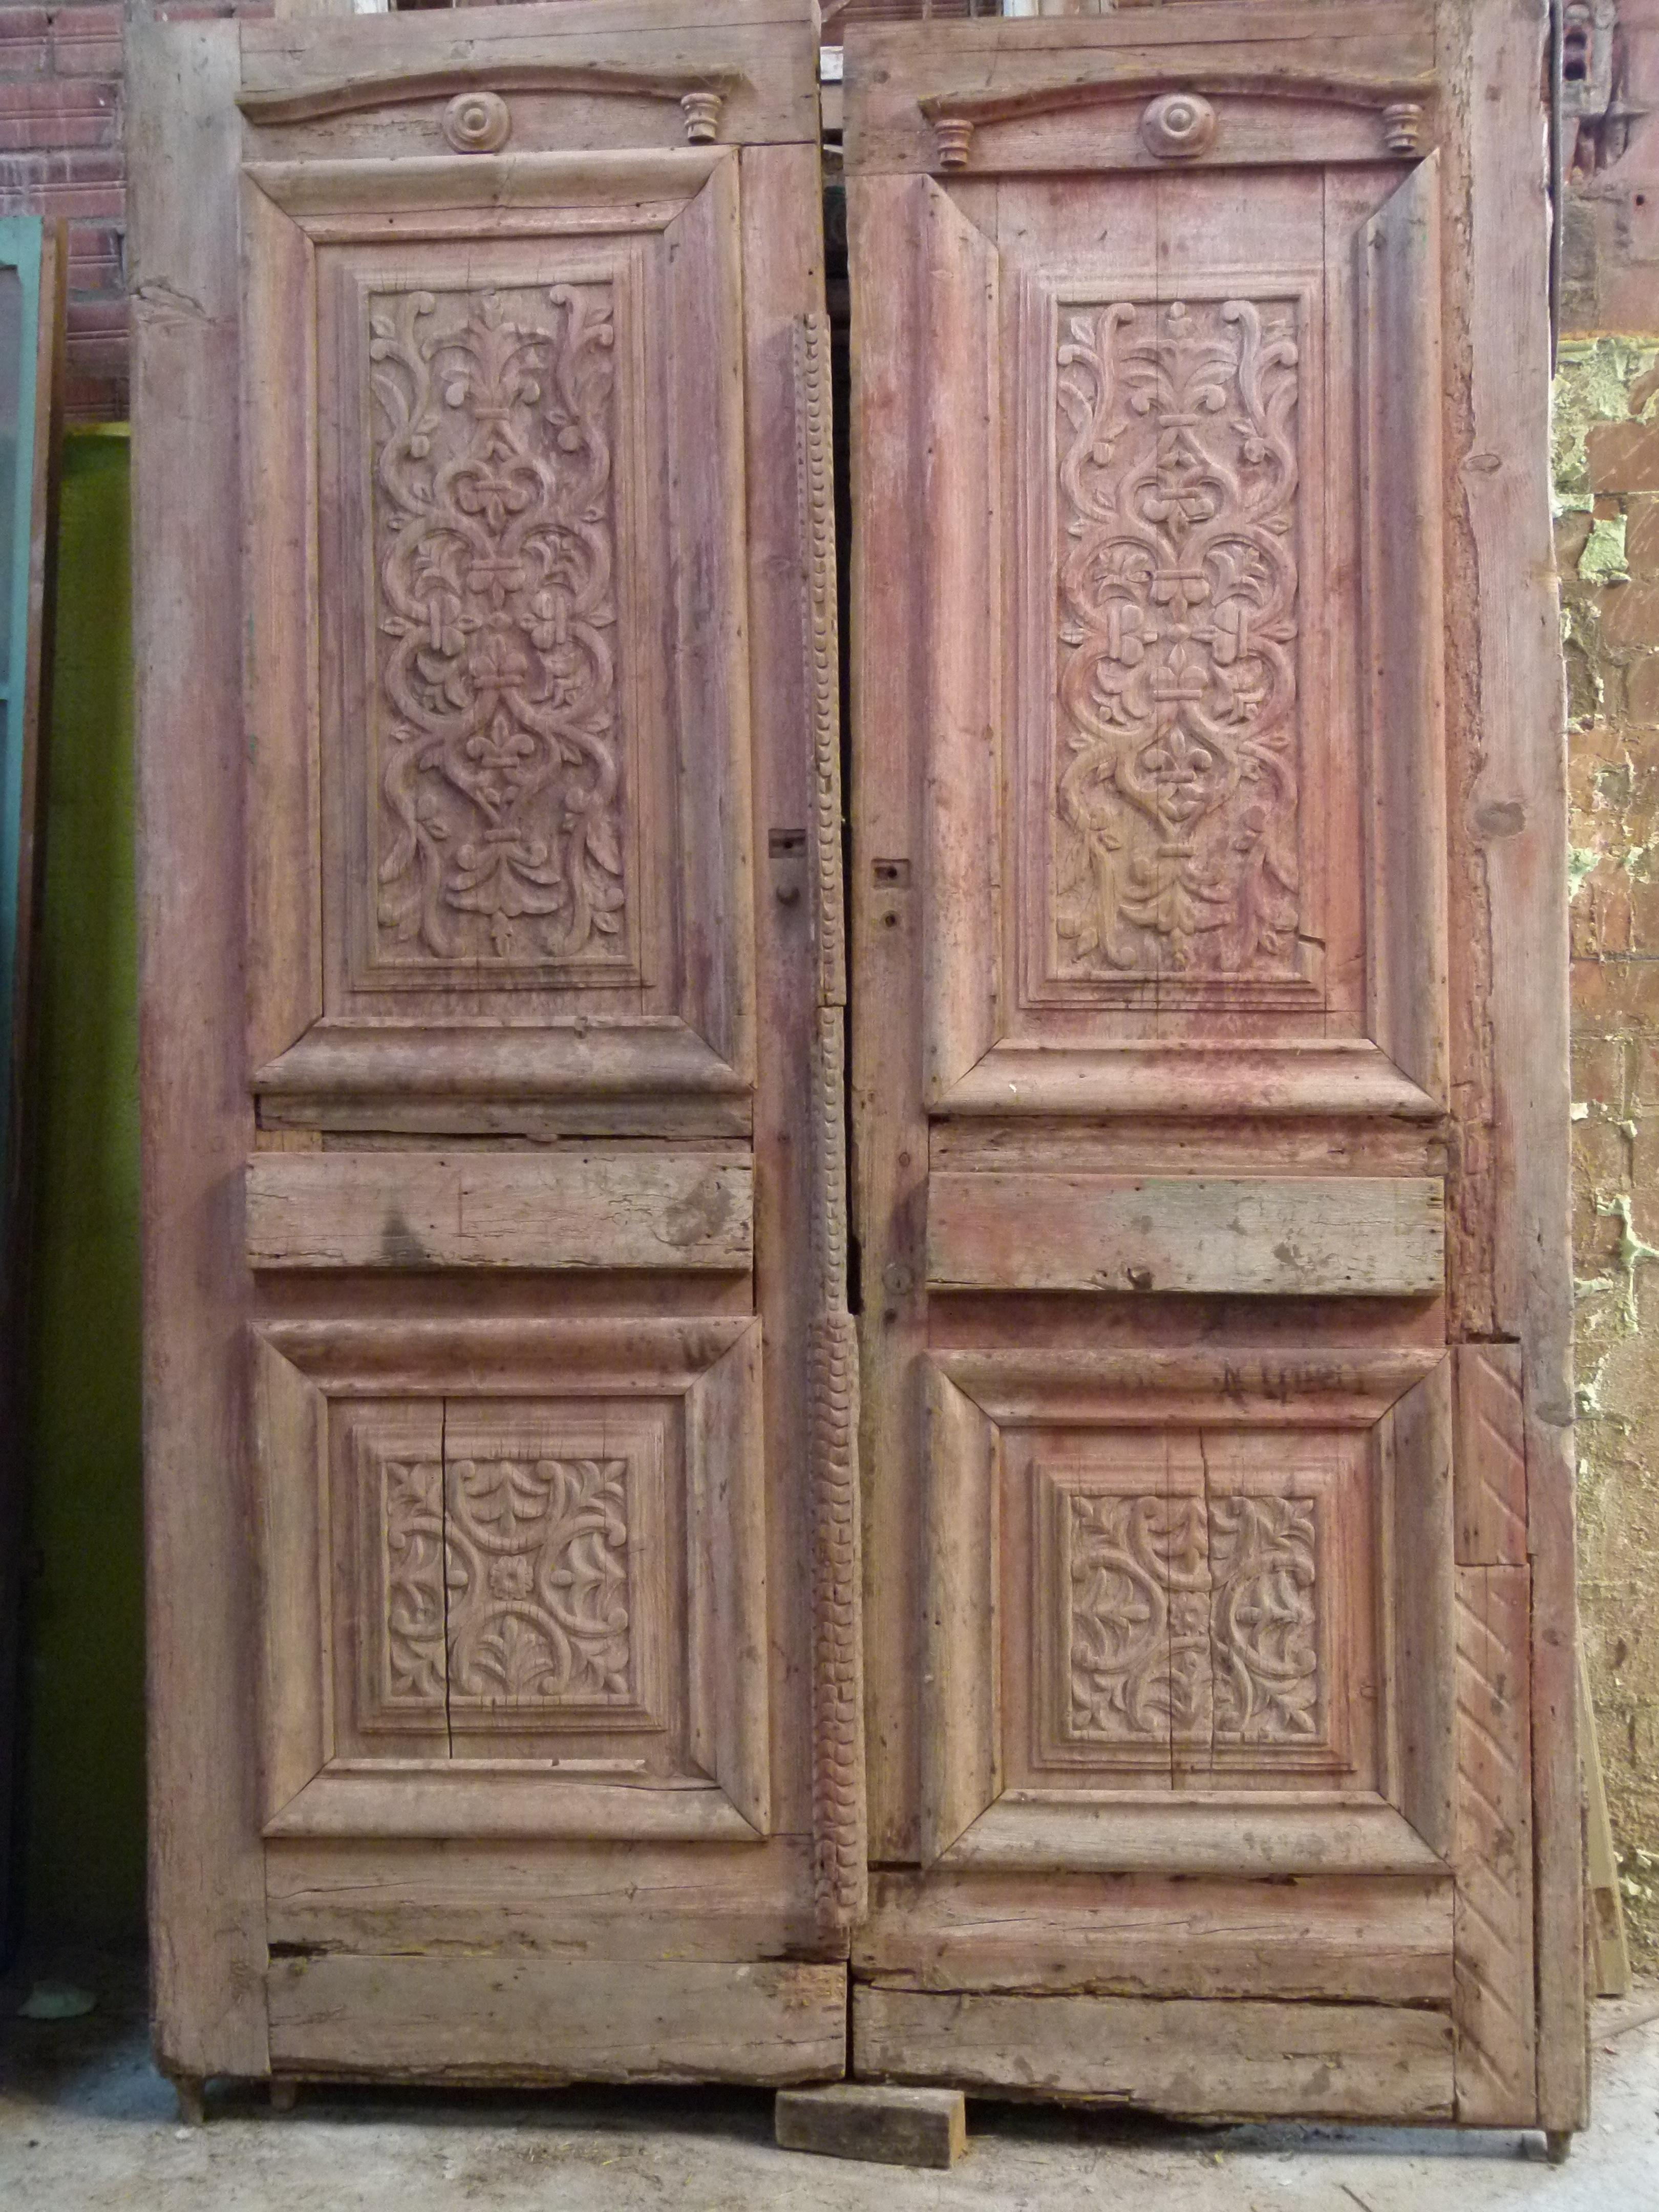 19th century wooden double door portal in Art Nouveau style from Catalonien, Spain.
Carved wood typical from this period.
Each door has 2 lateral pivots to be embedded in the stone.
The original patina of this portal and its style will give the